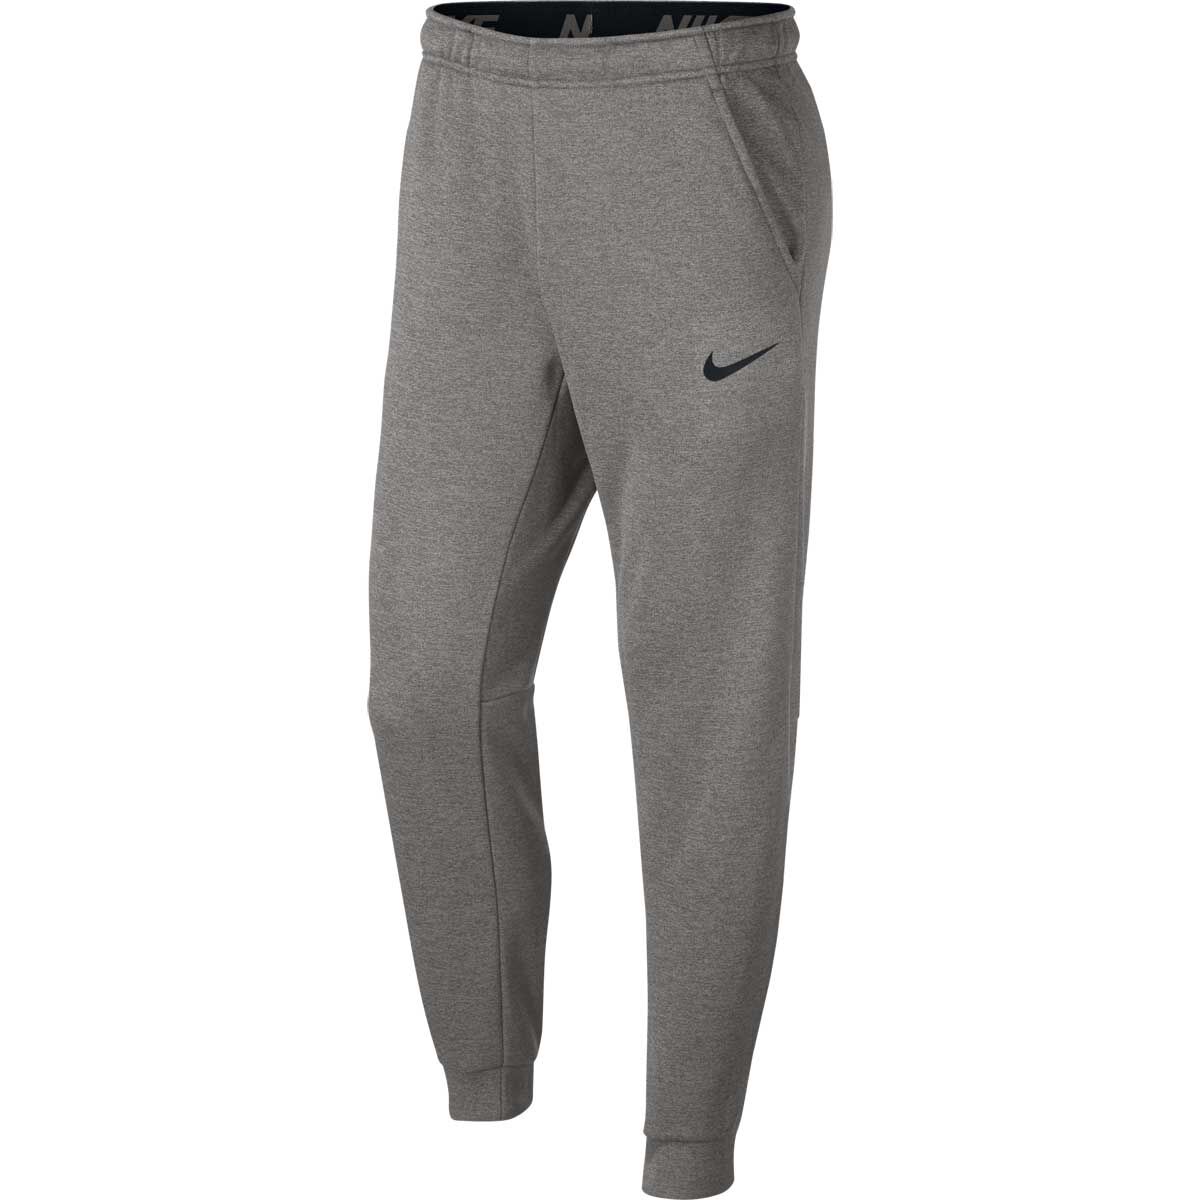 tapered workout pants